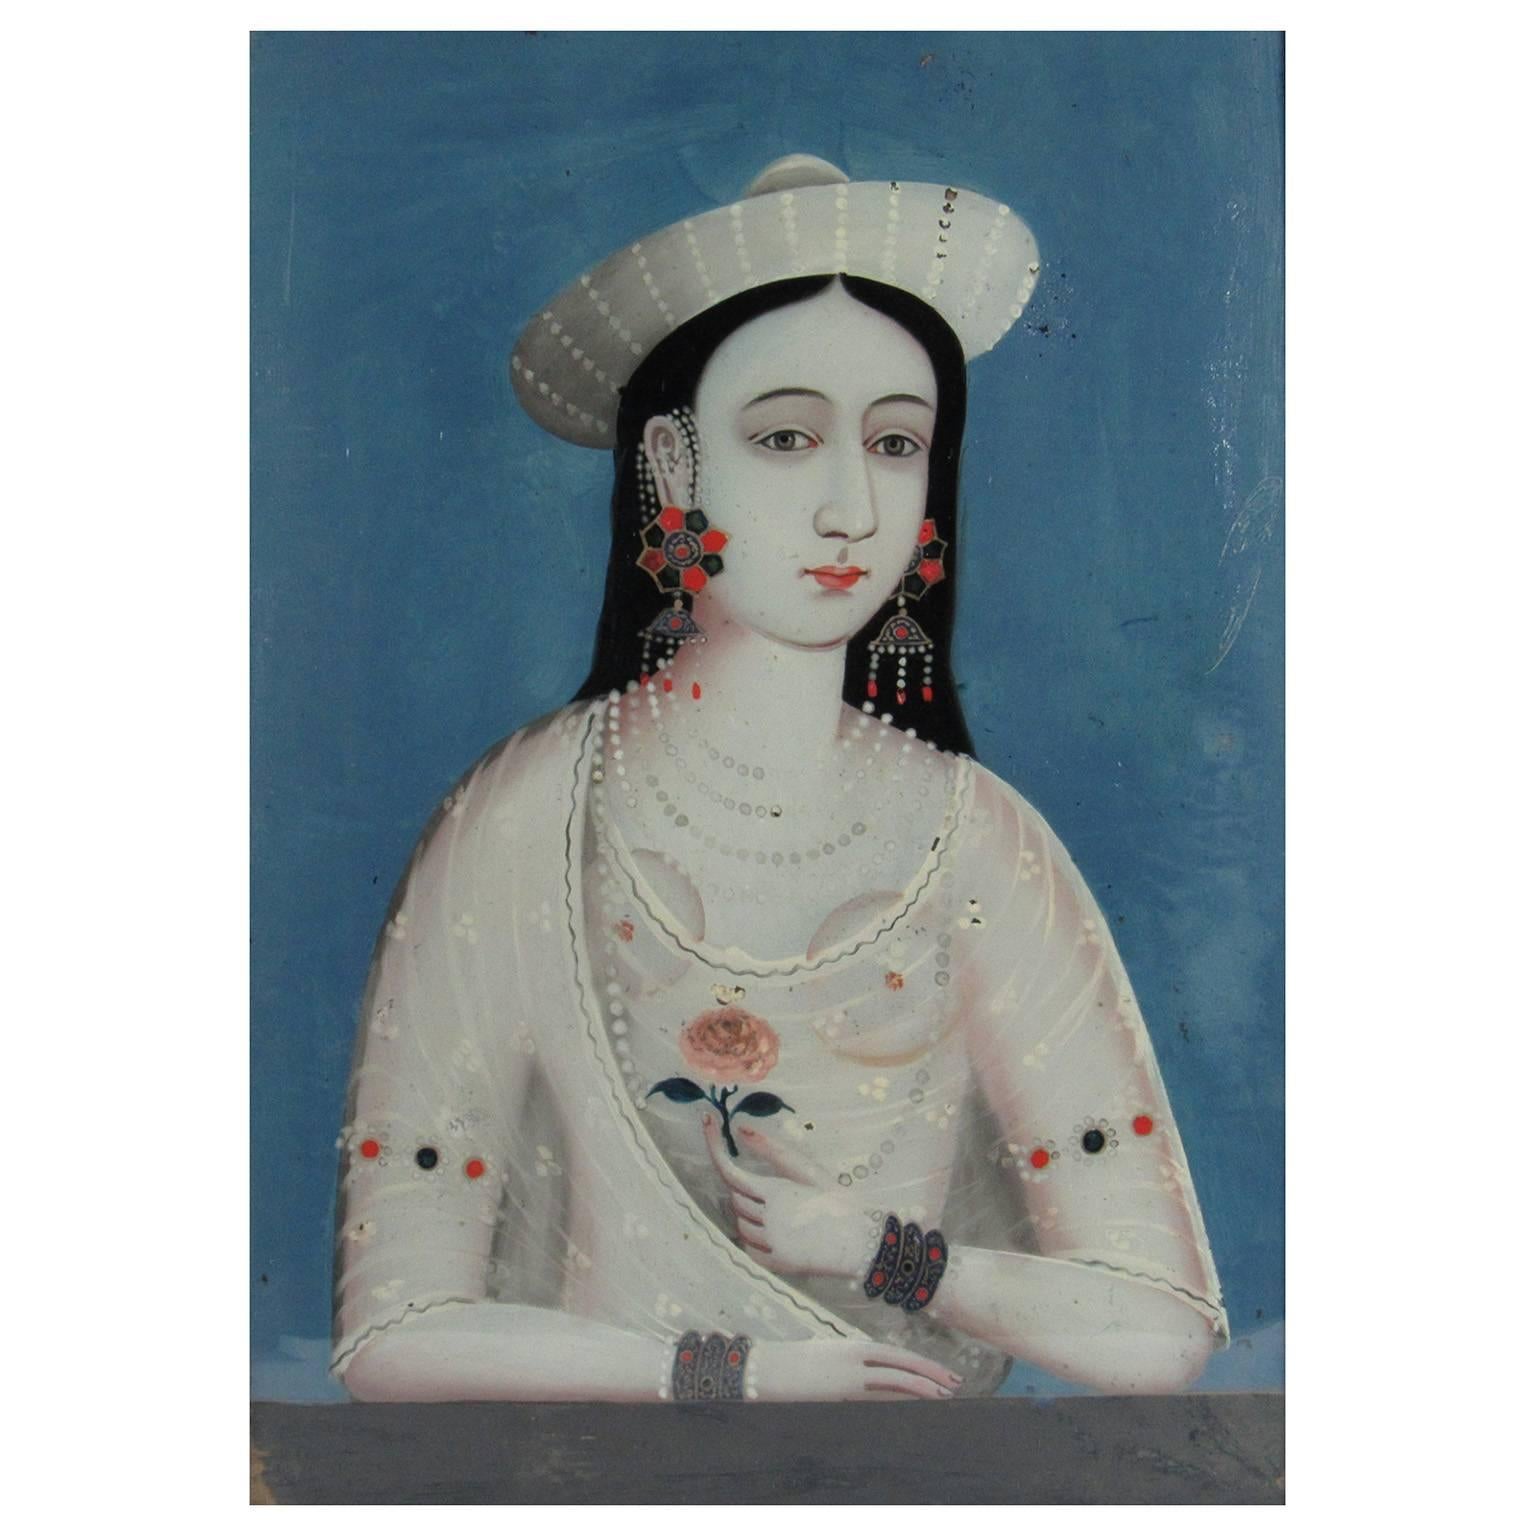 China Trade Reverse Painting on Glass Portrait of a Young Woman with Pink Flower, late 19th century.  Depicting a dark haired young woman rendered in entirely in white, symbolic of her purity and chastity.  She is wearing a white wide rimmed hat and